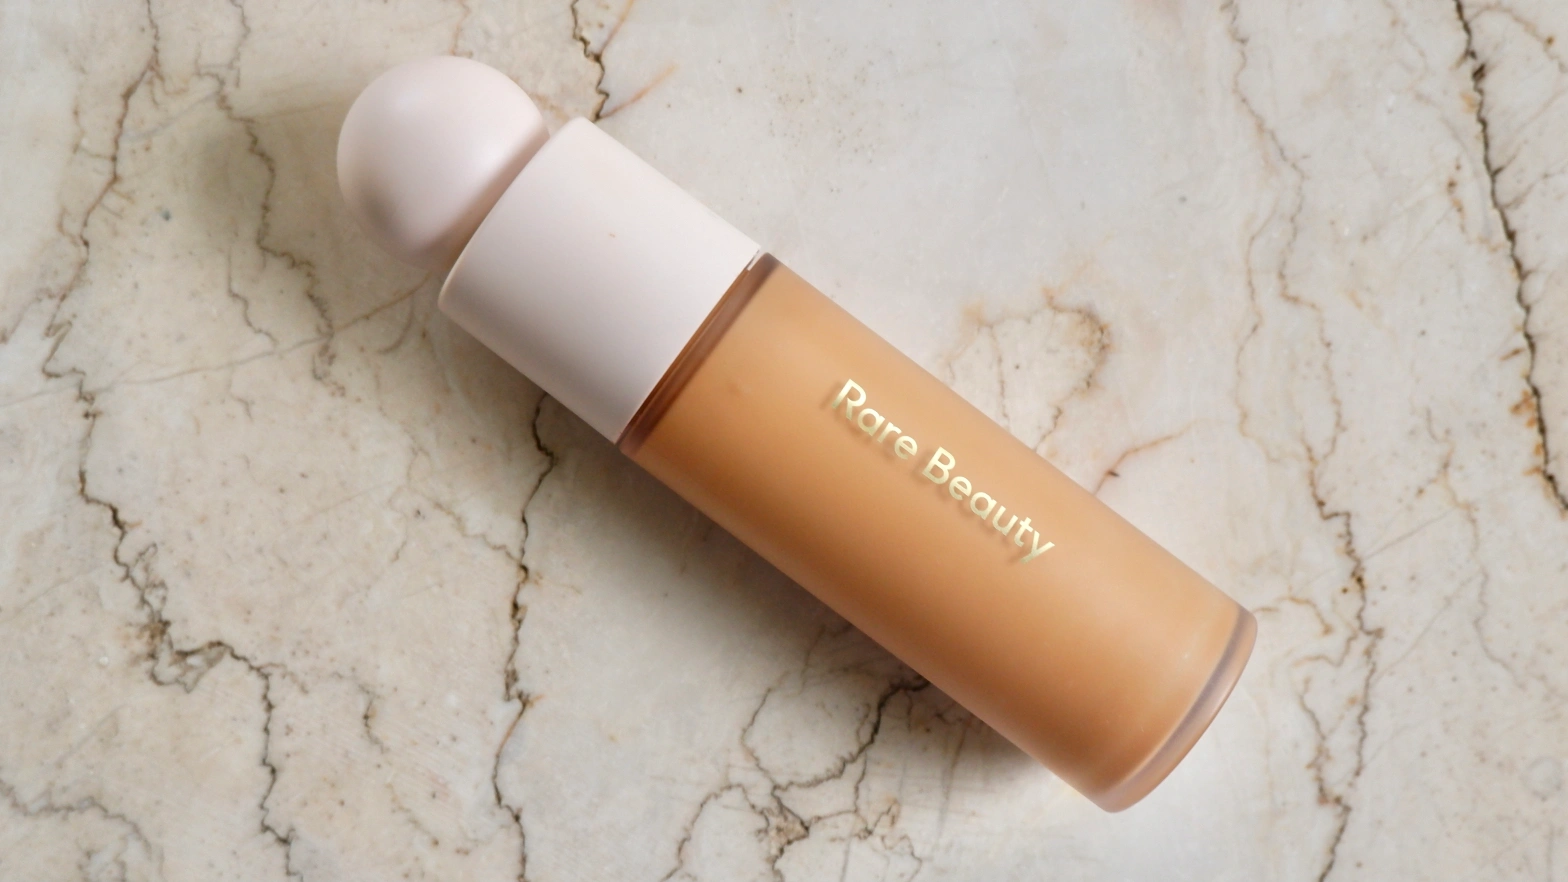 What is a Rare Beauty Foundation?